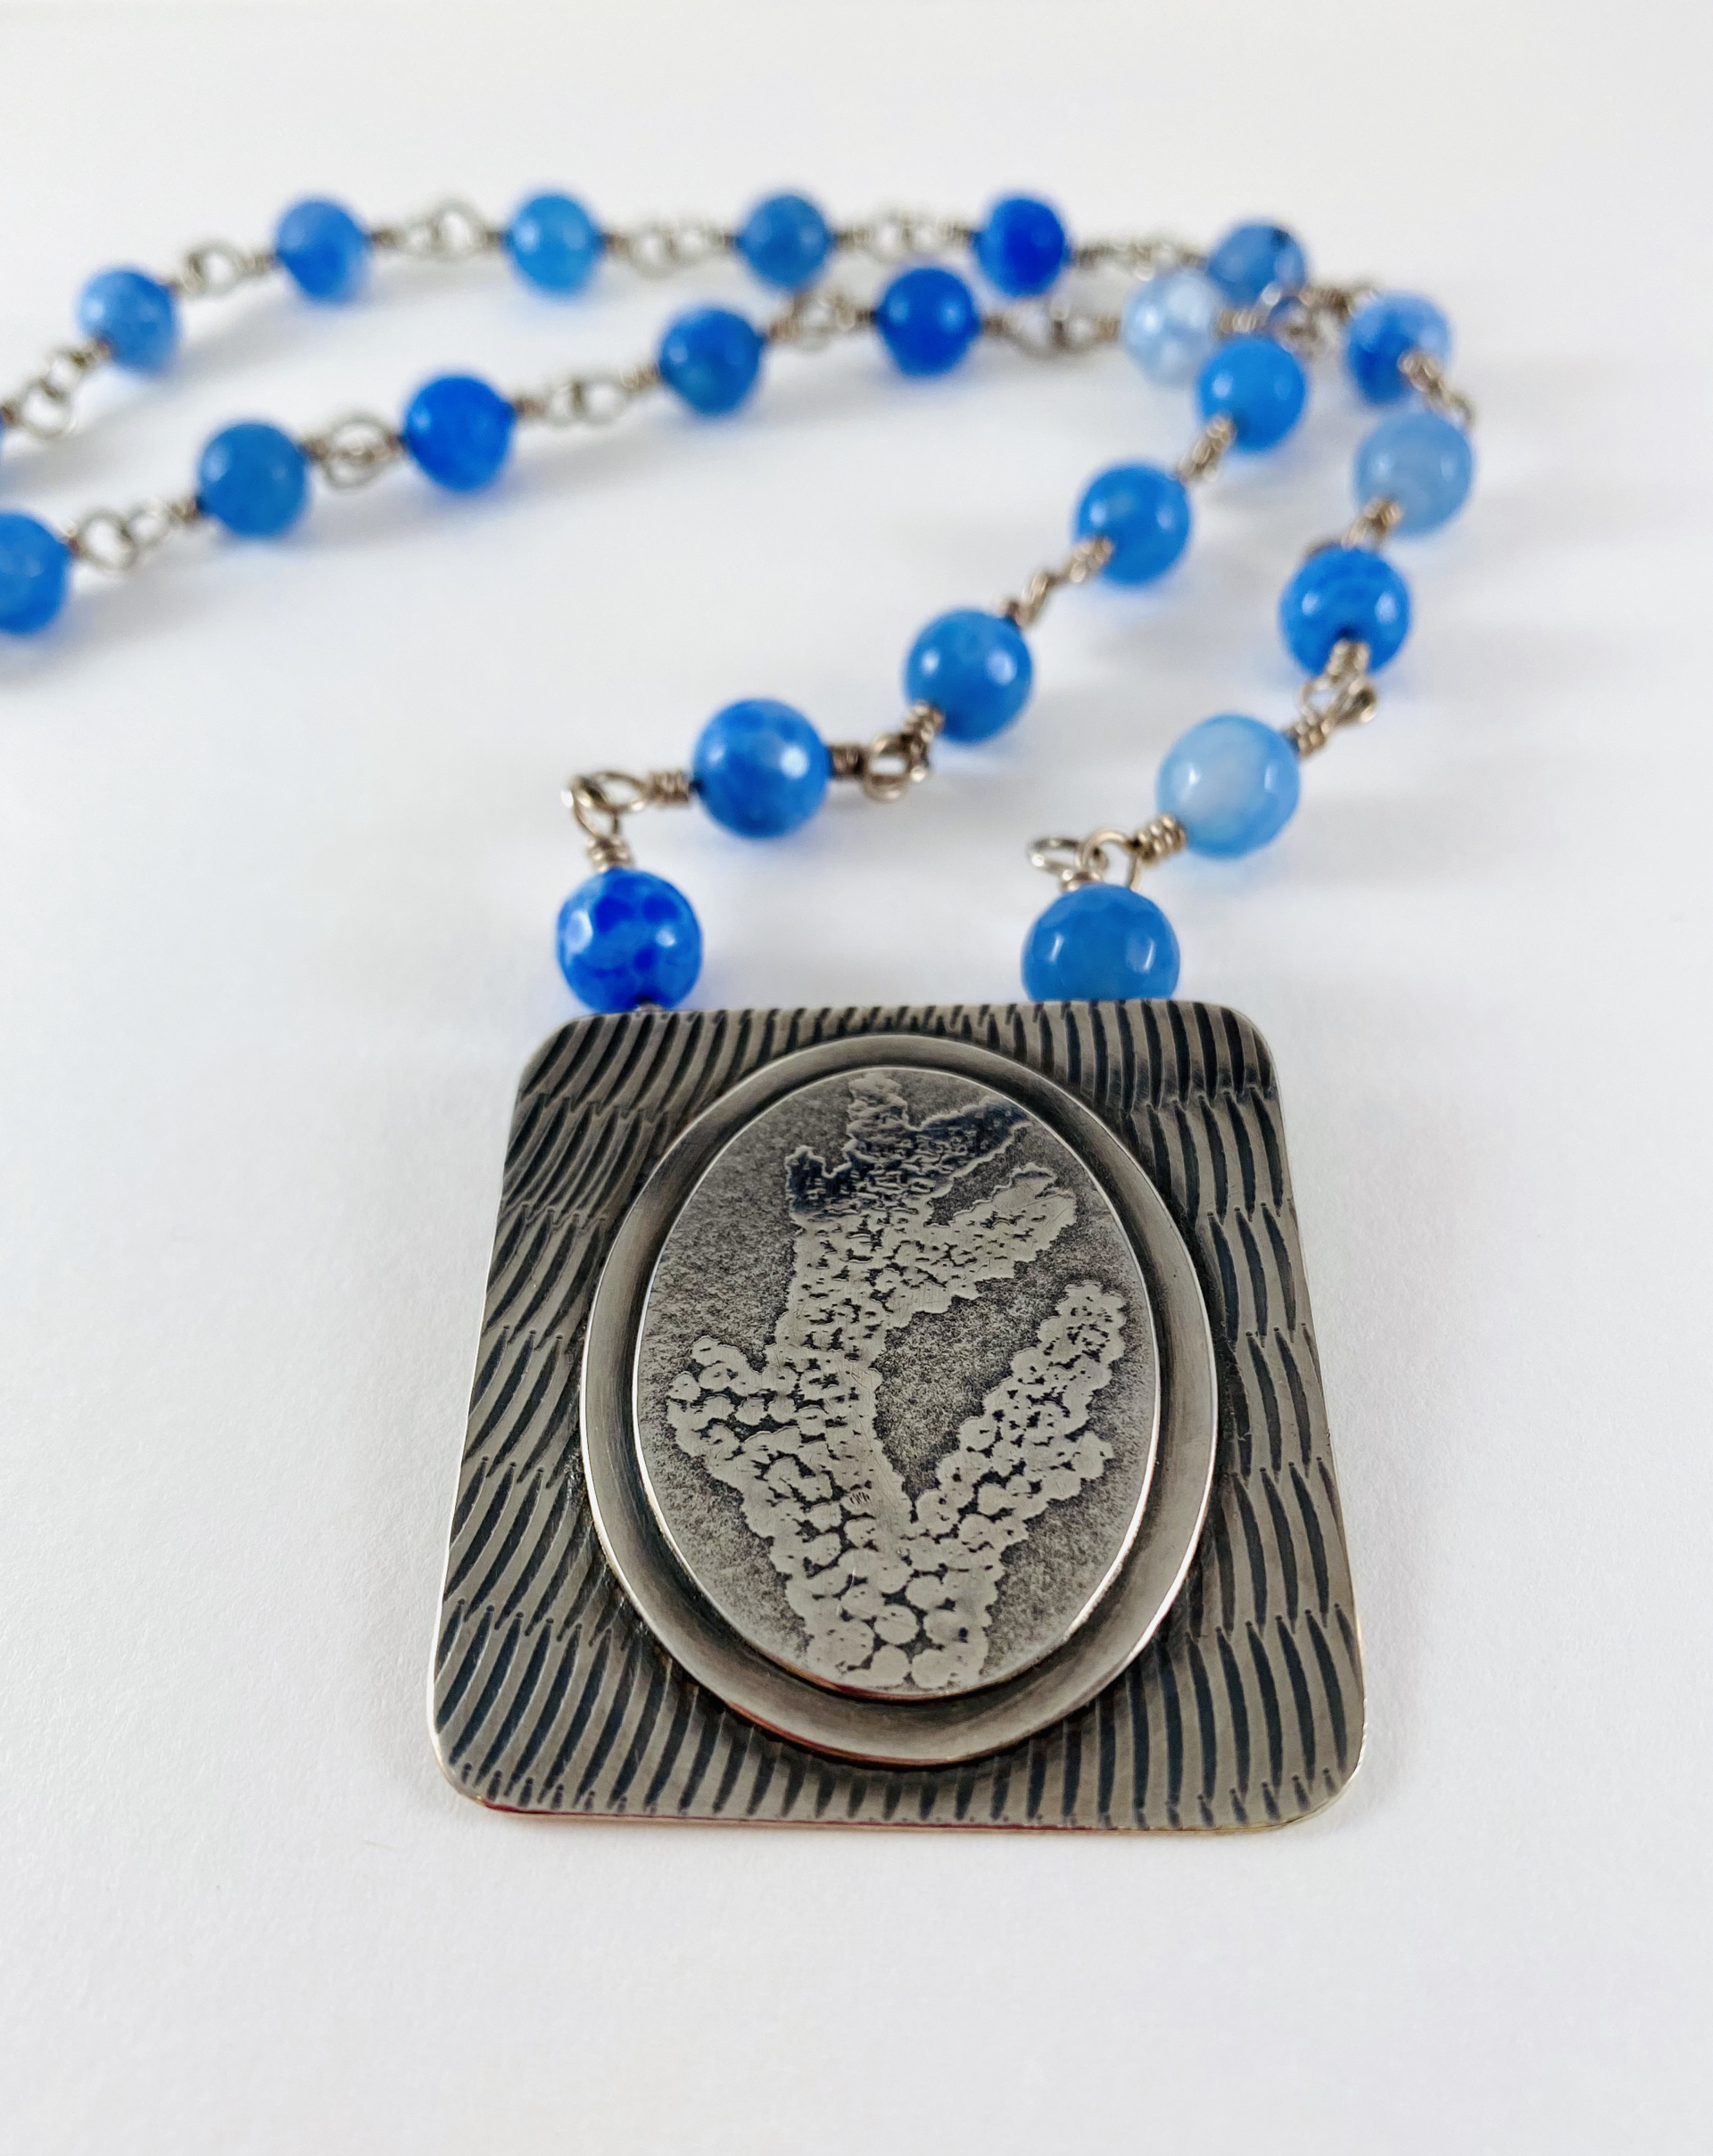 Hand Stamped Silver Pendant, Blue Agate Chain Necklace AB20-36 by Anne Bivens